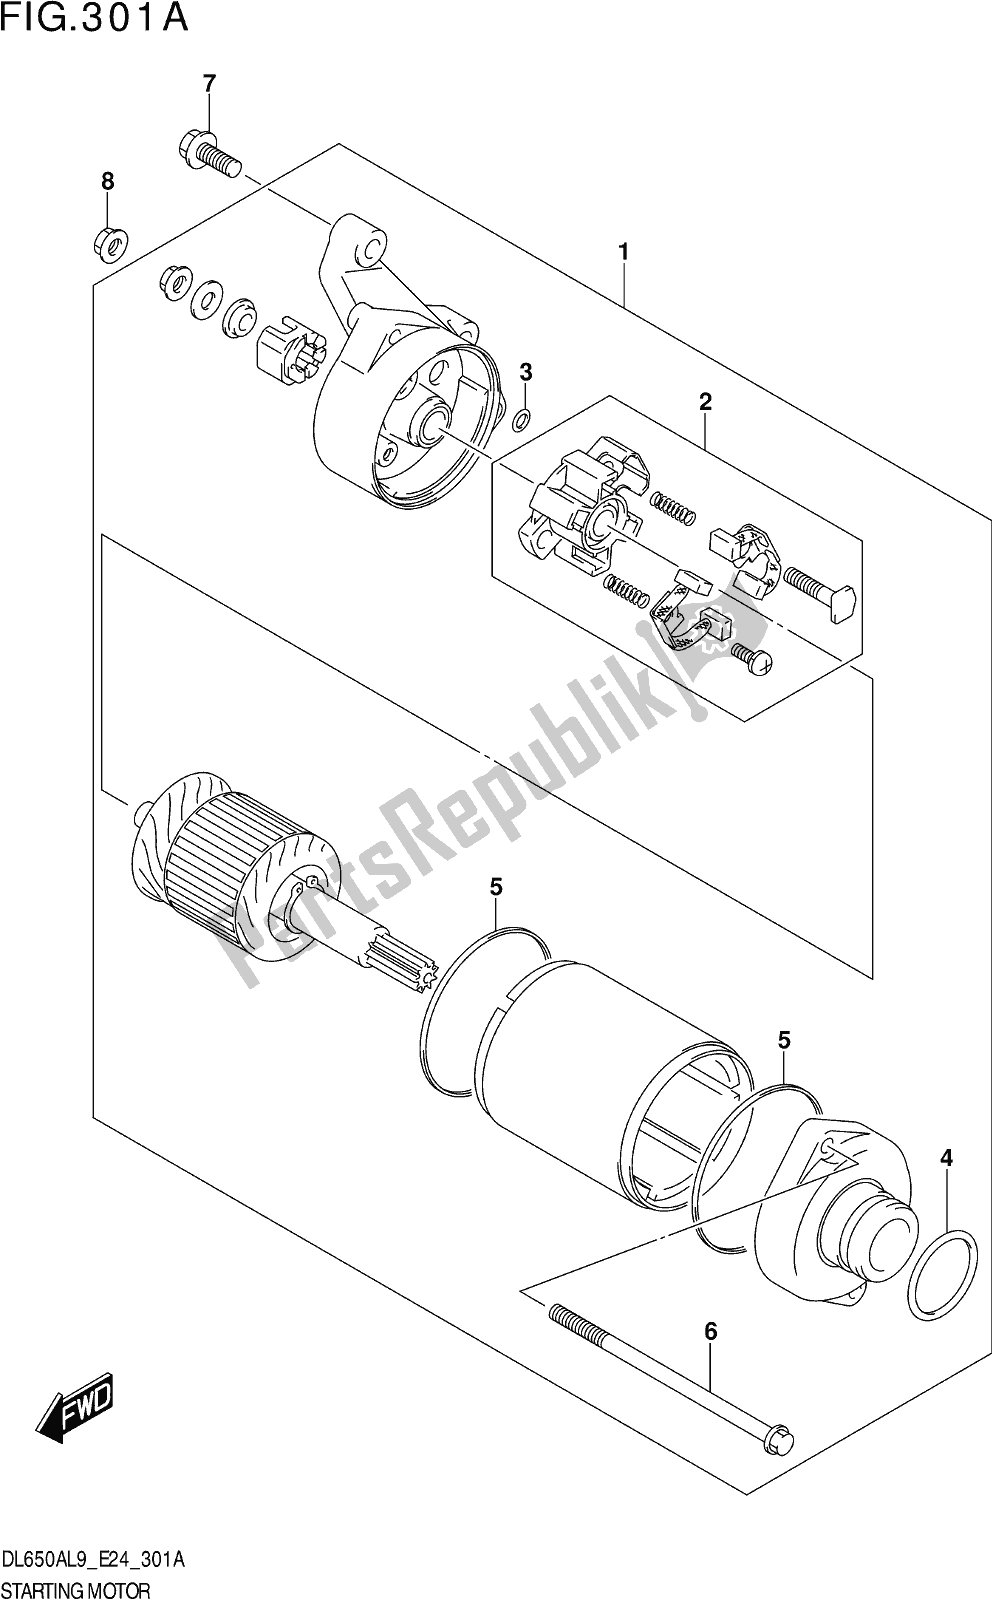 All parts for the Fig. 301a Starting Motor of the Suzuki DL 650A V Strom 2019